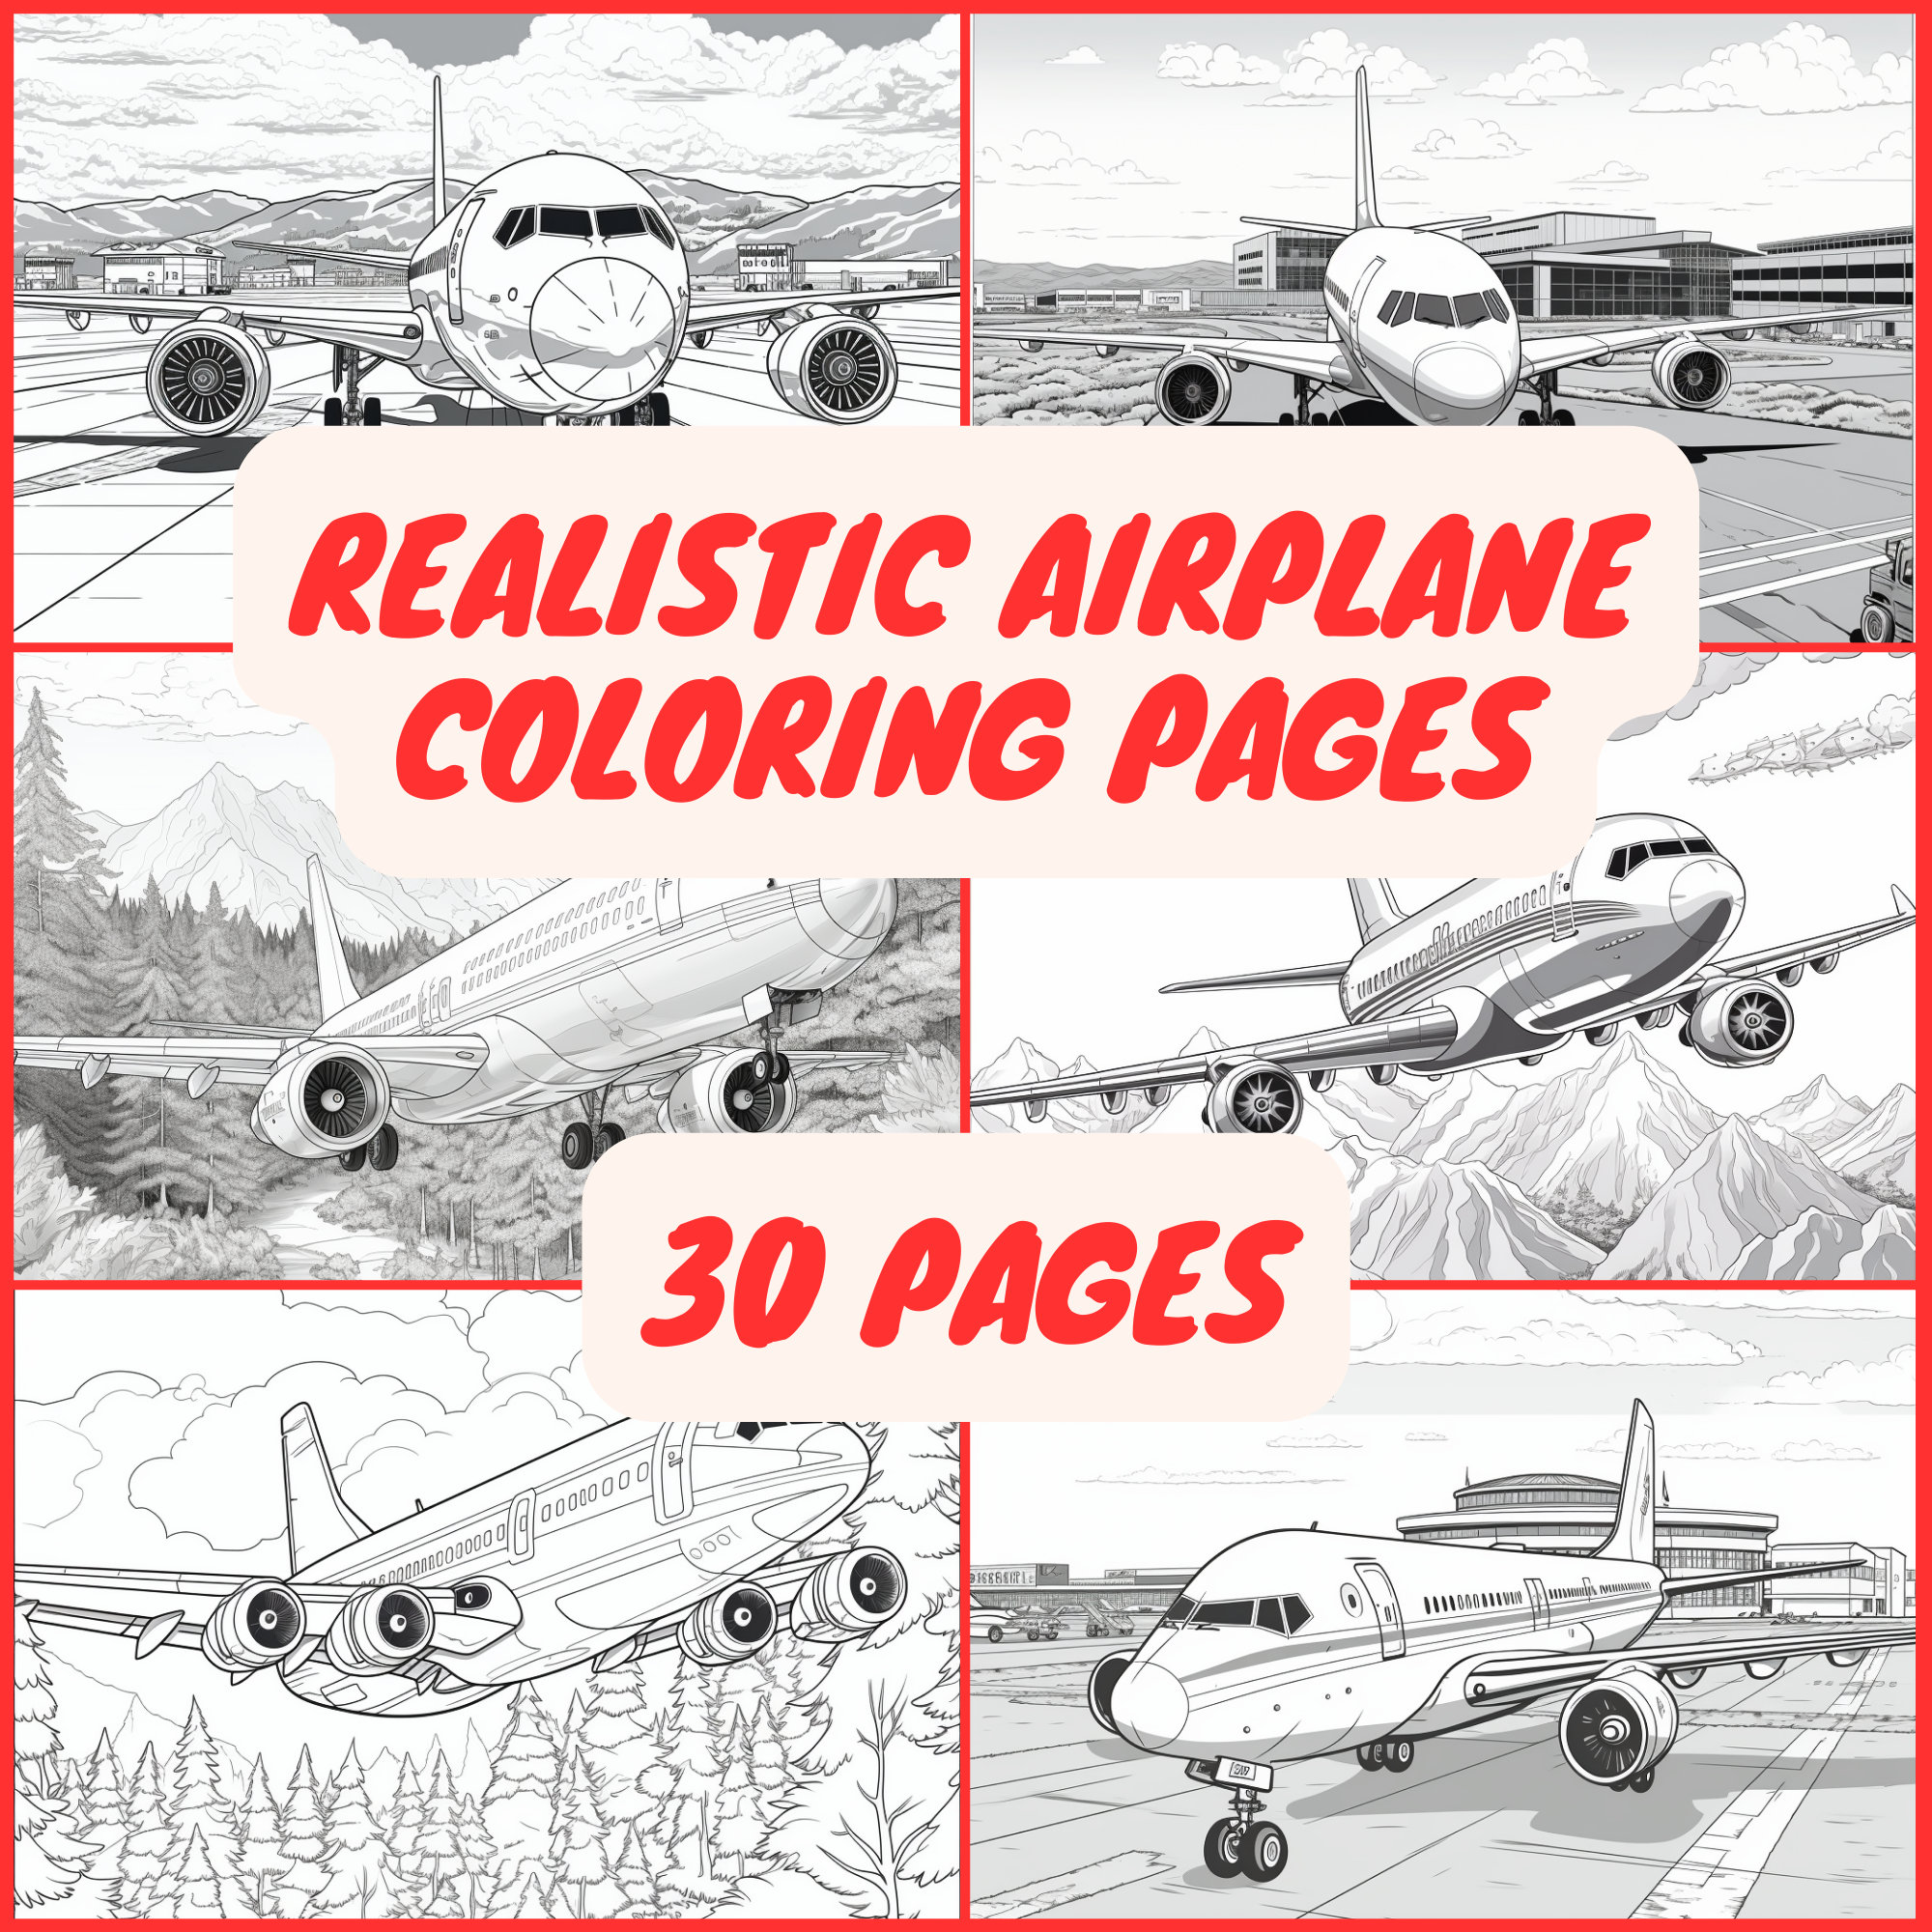 Realistic airplane coloring book pages for kids and adults ideal birthday preschool homeschool printable aviation fun